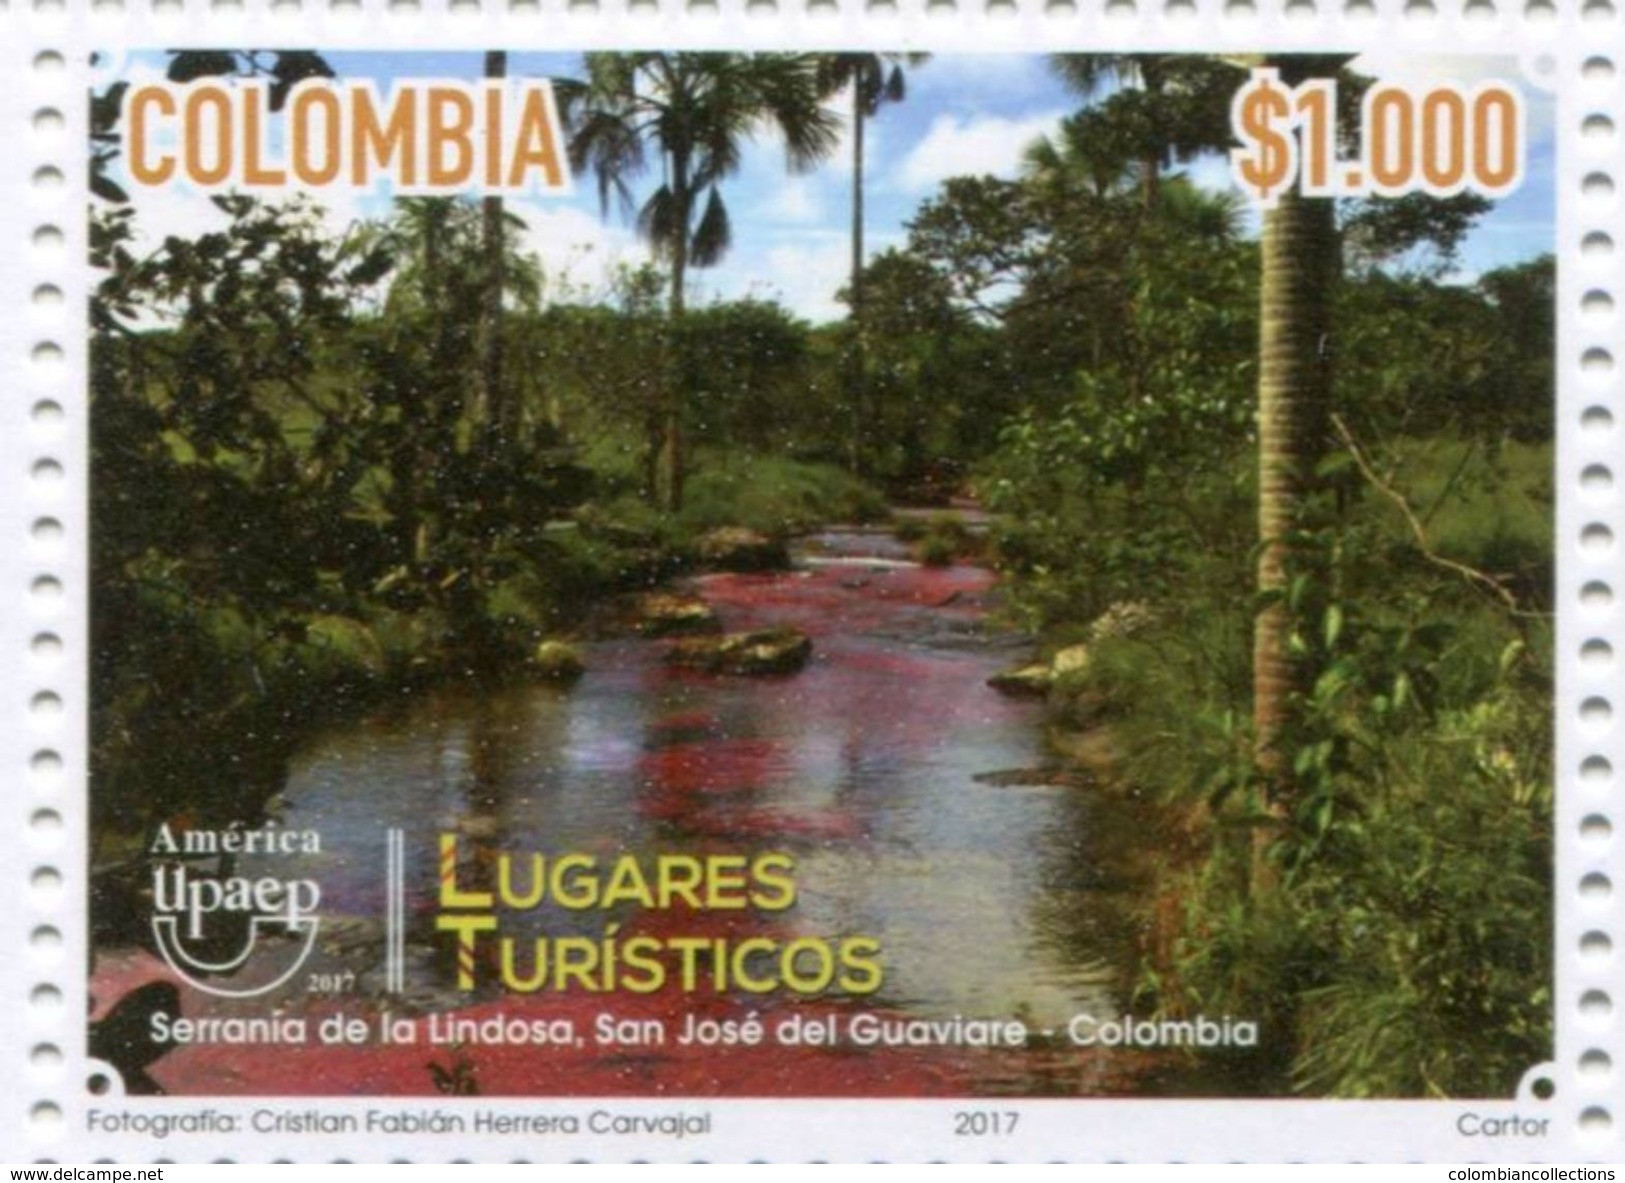 Lote 2017-15, Colombia, 2017, Sello, Stamp, Lugares Turisticos, Upaep, River, Tree, Caño Cristales, 2v - Colombia